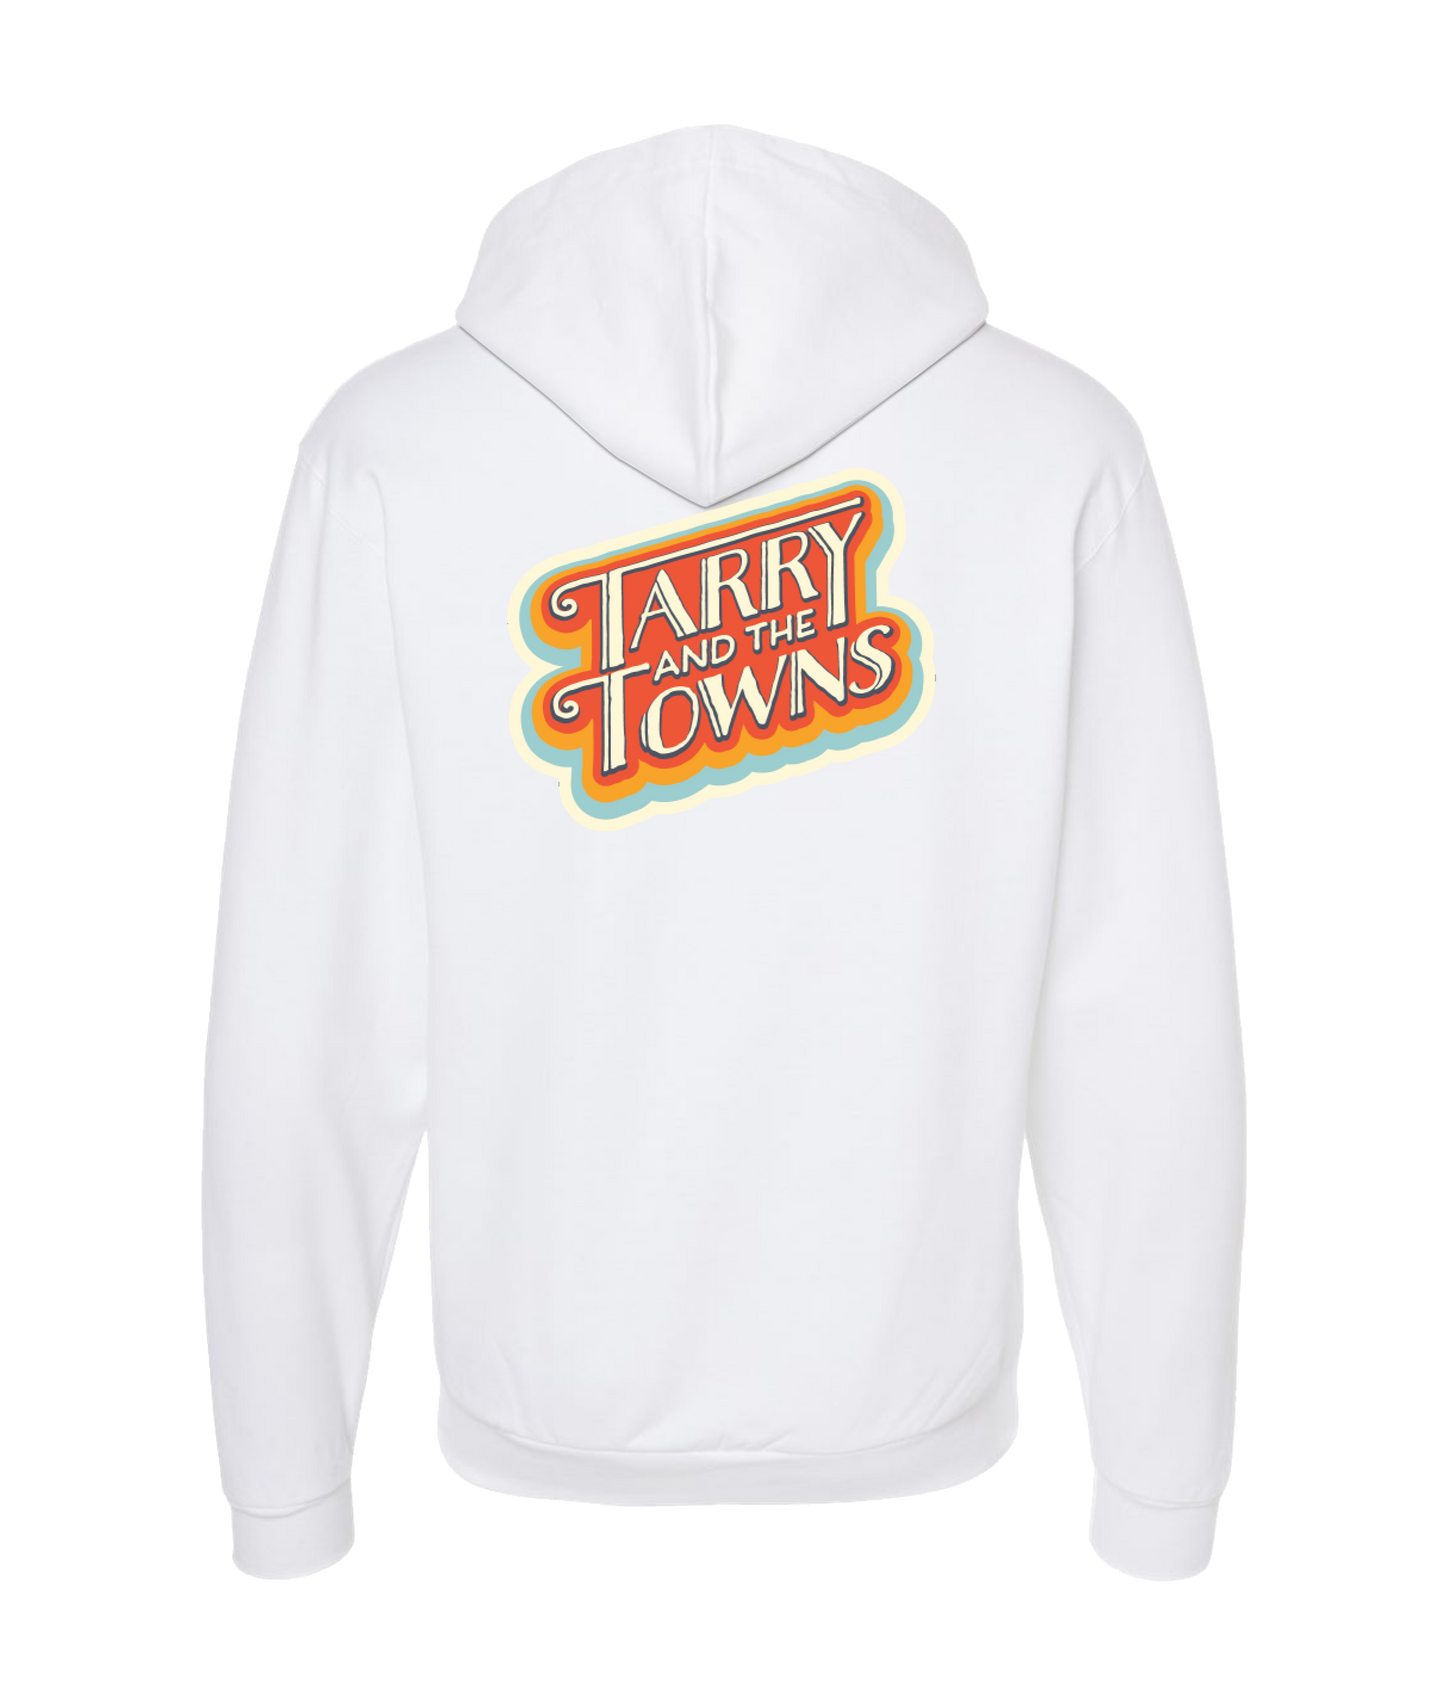 Tarry and the Towns - Vintage - White Zip Up Hoodie